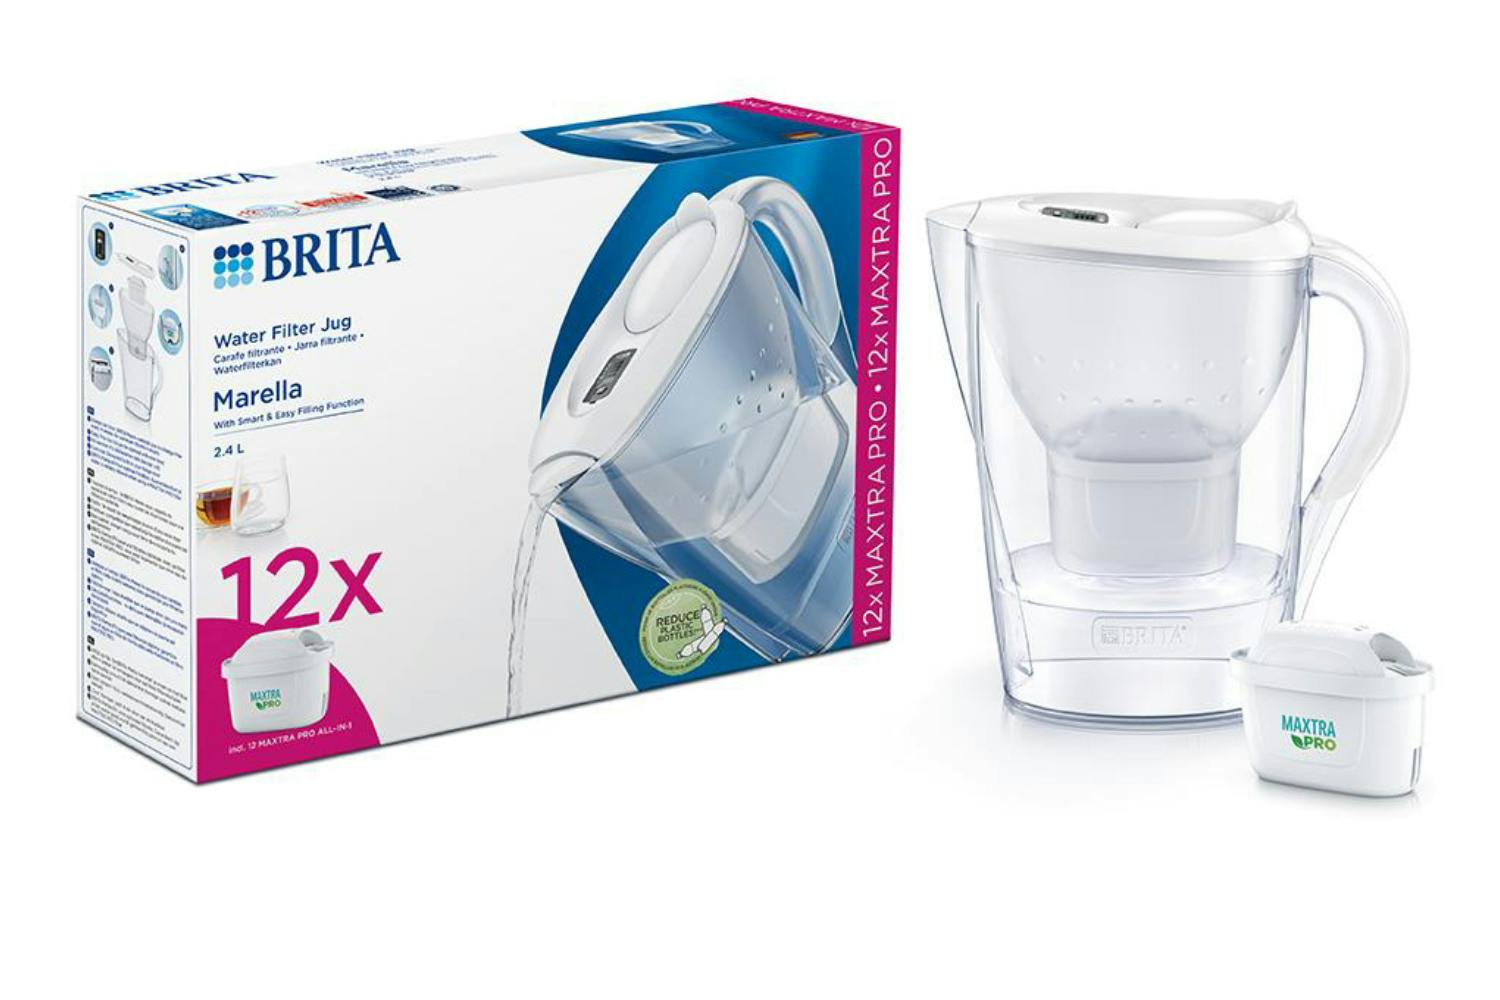 Pack of Maxtra Pro All-in-One Filter Cartridges - White / 3